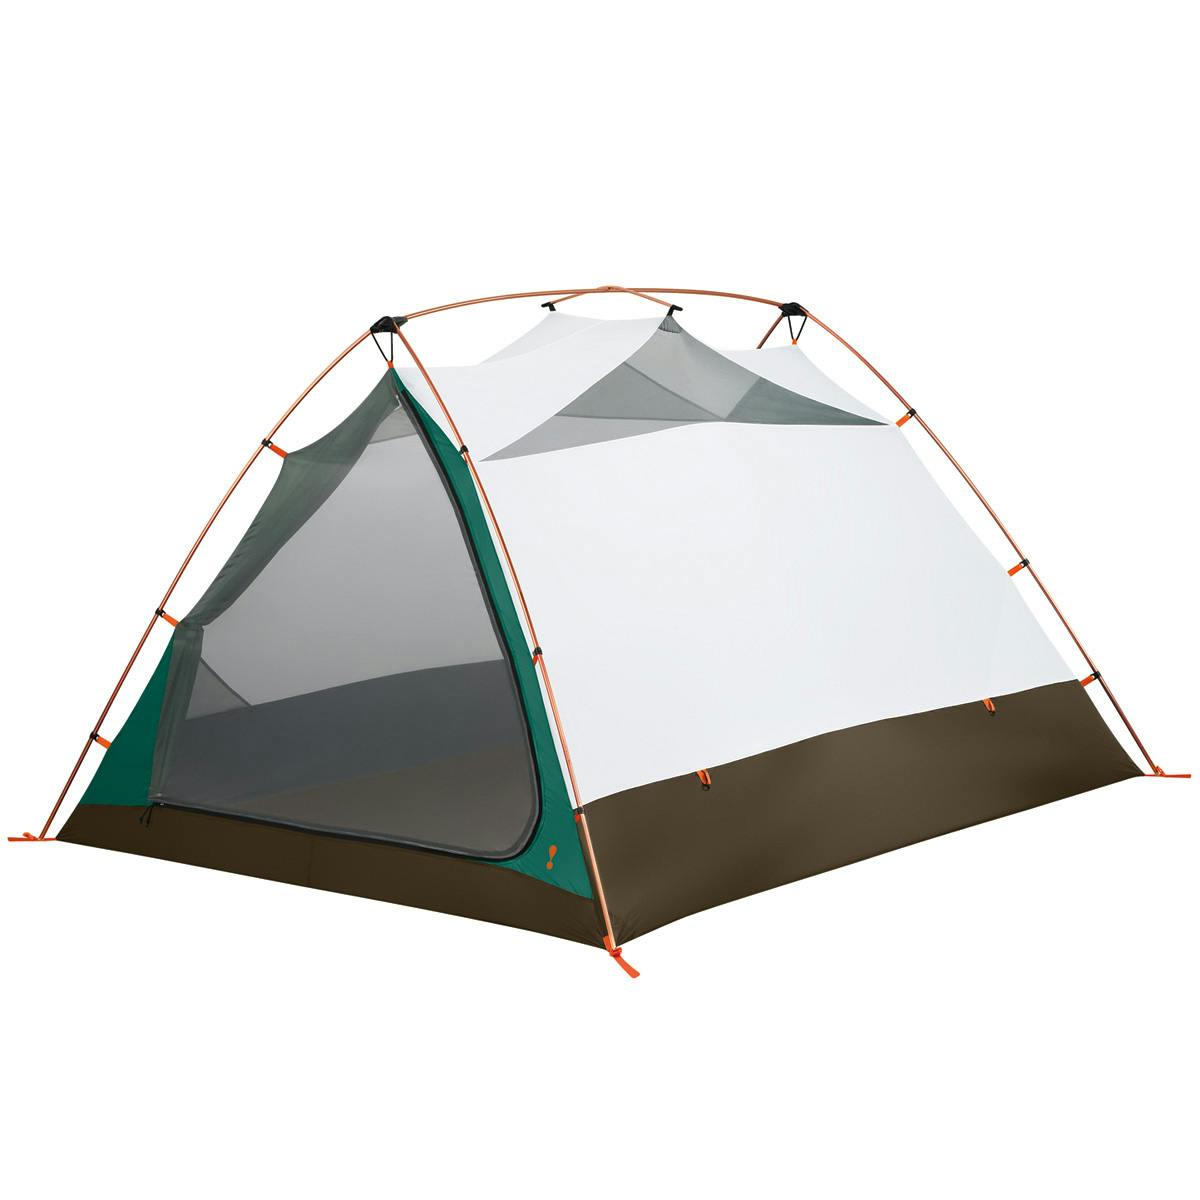 Eureka! Timberline SQ Outfitter 4 Person Tent · Dark Green